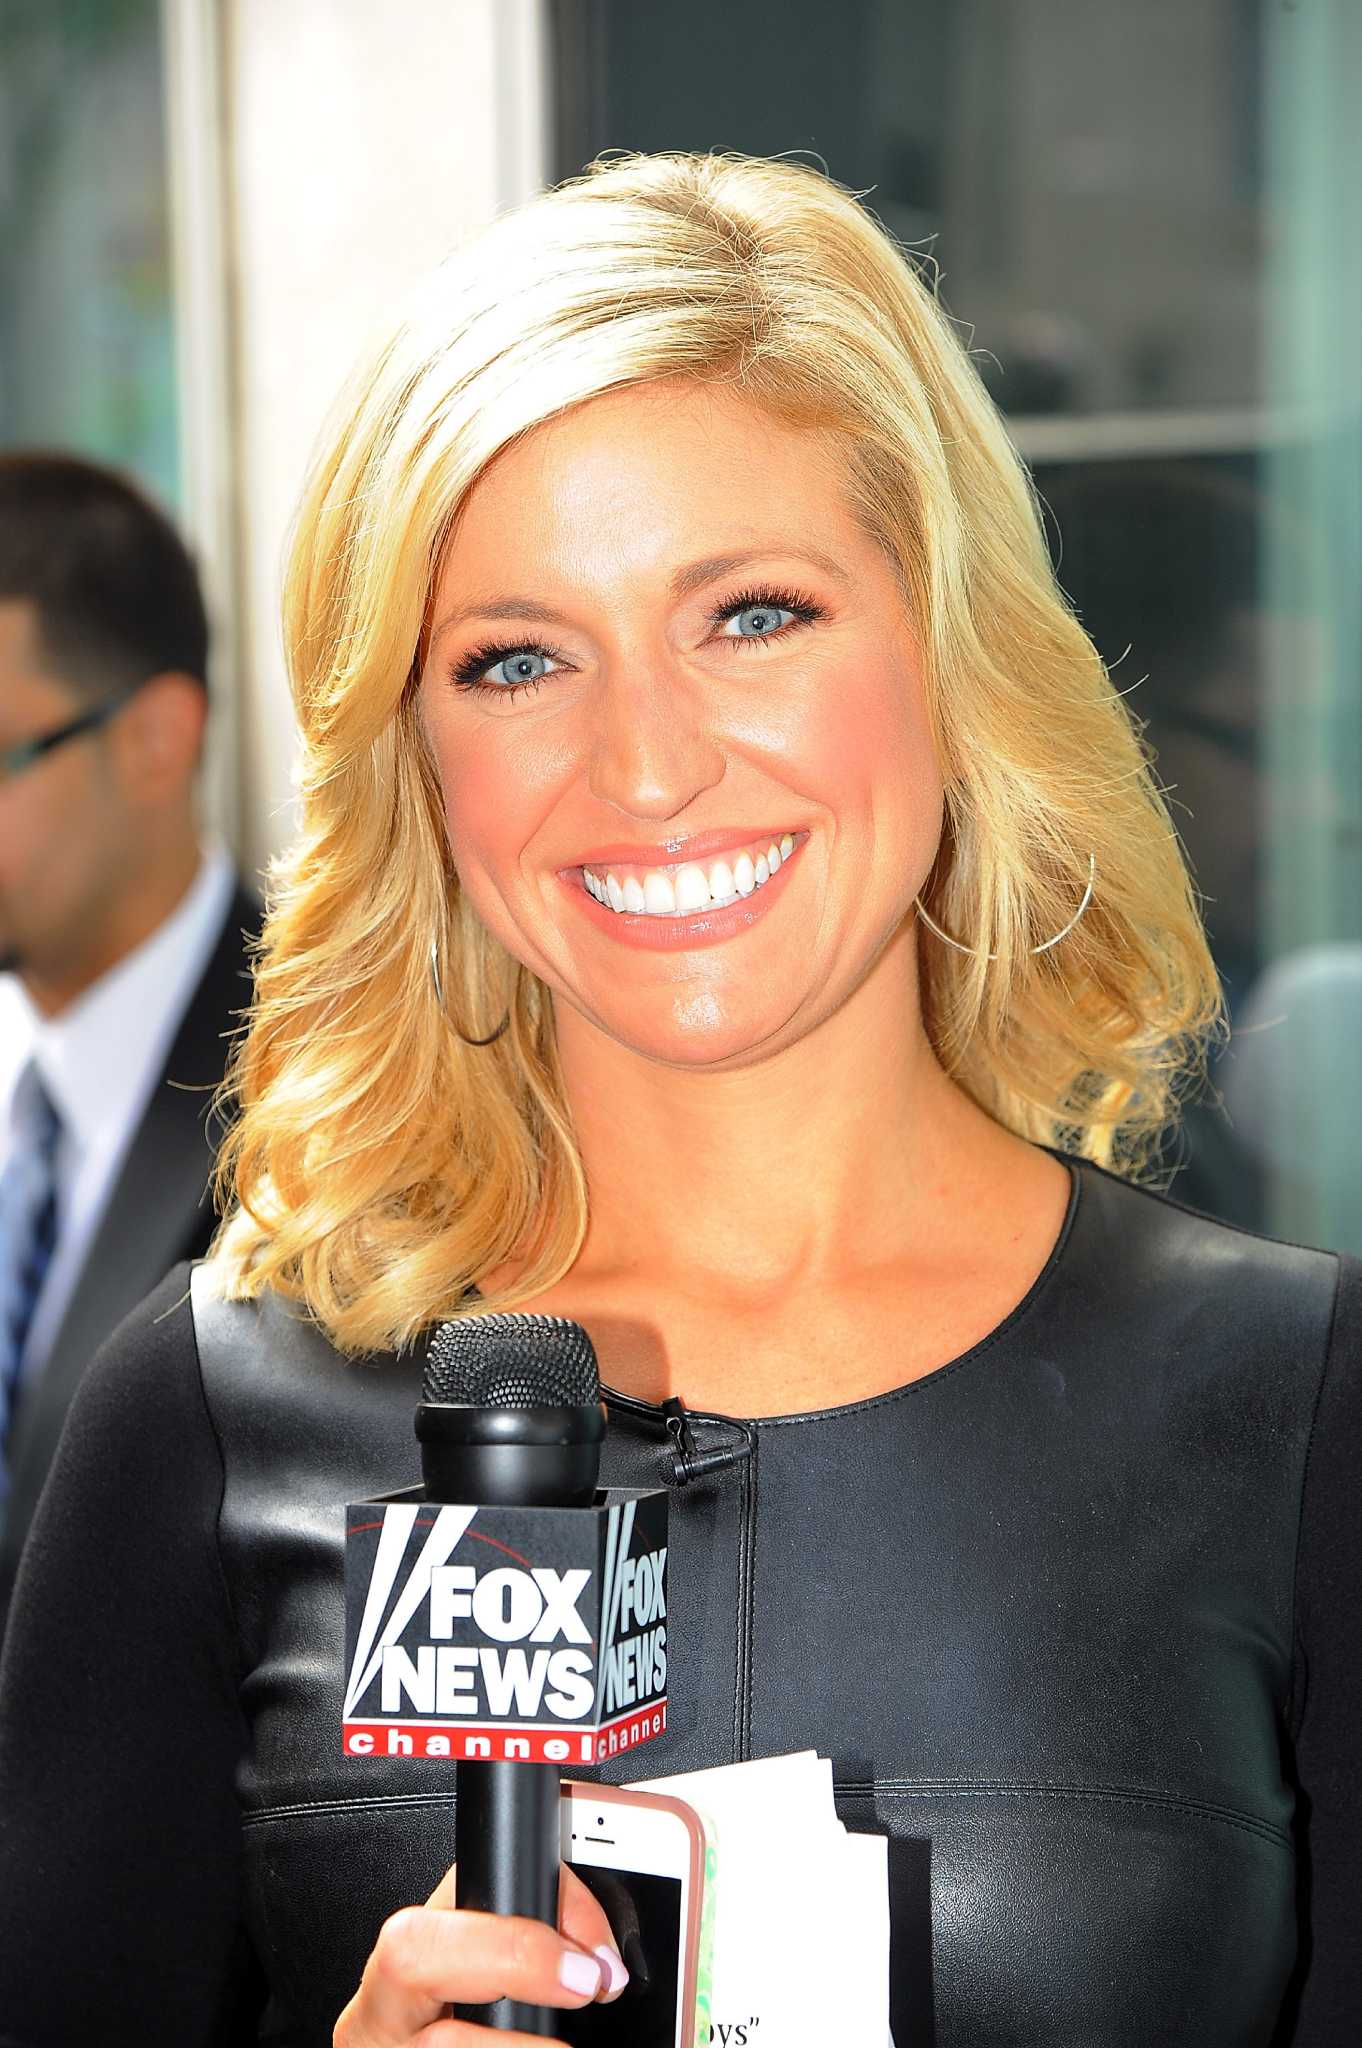 fox and friends hosts